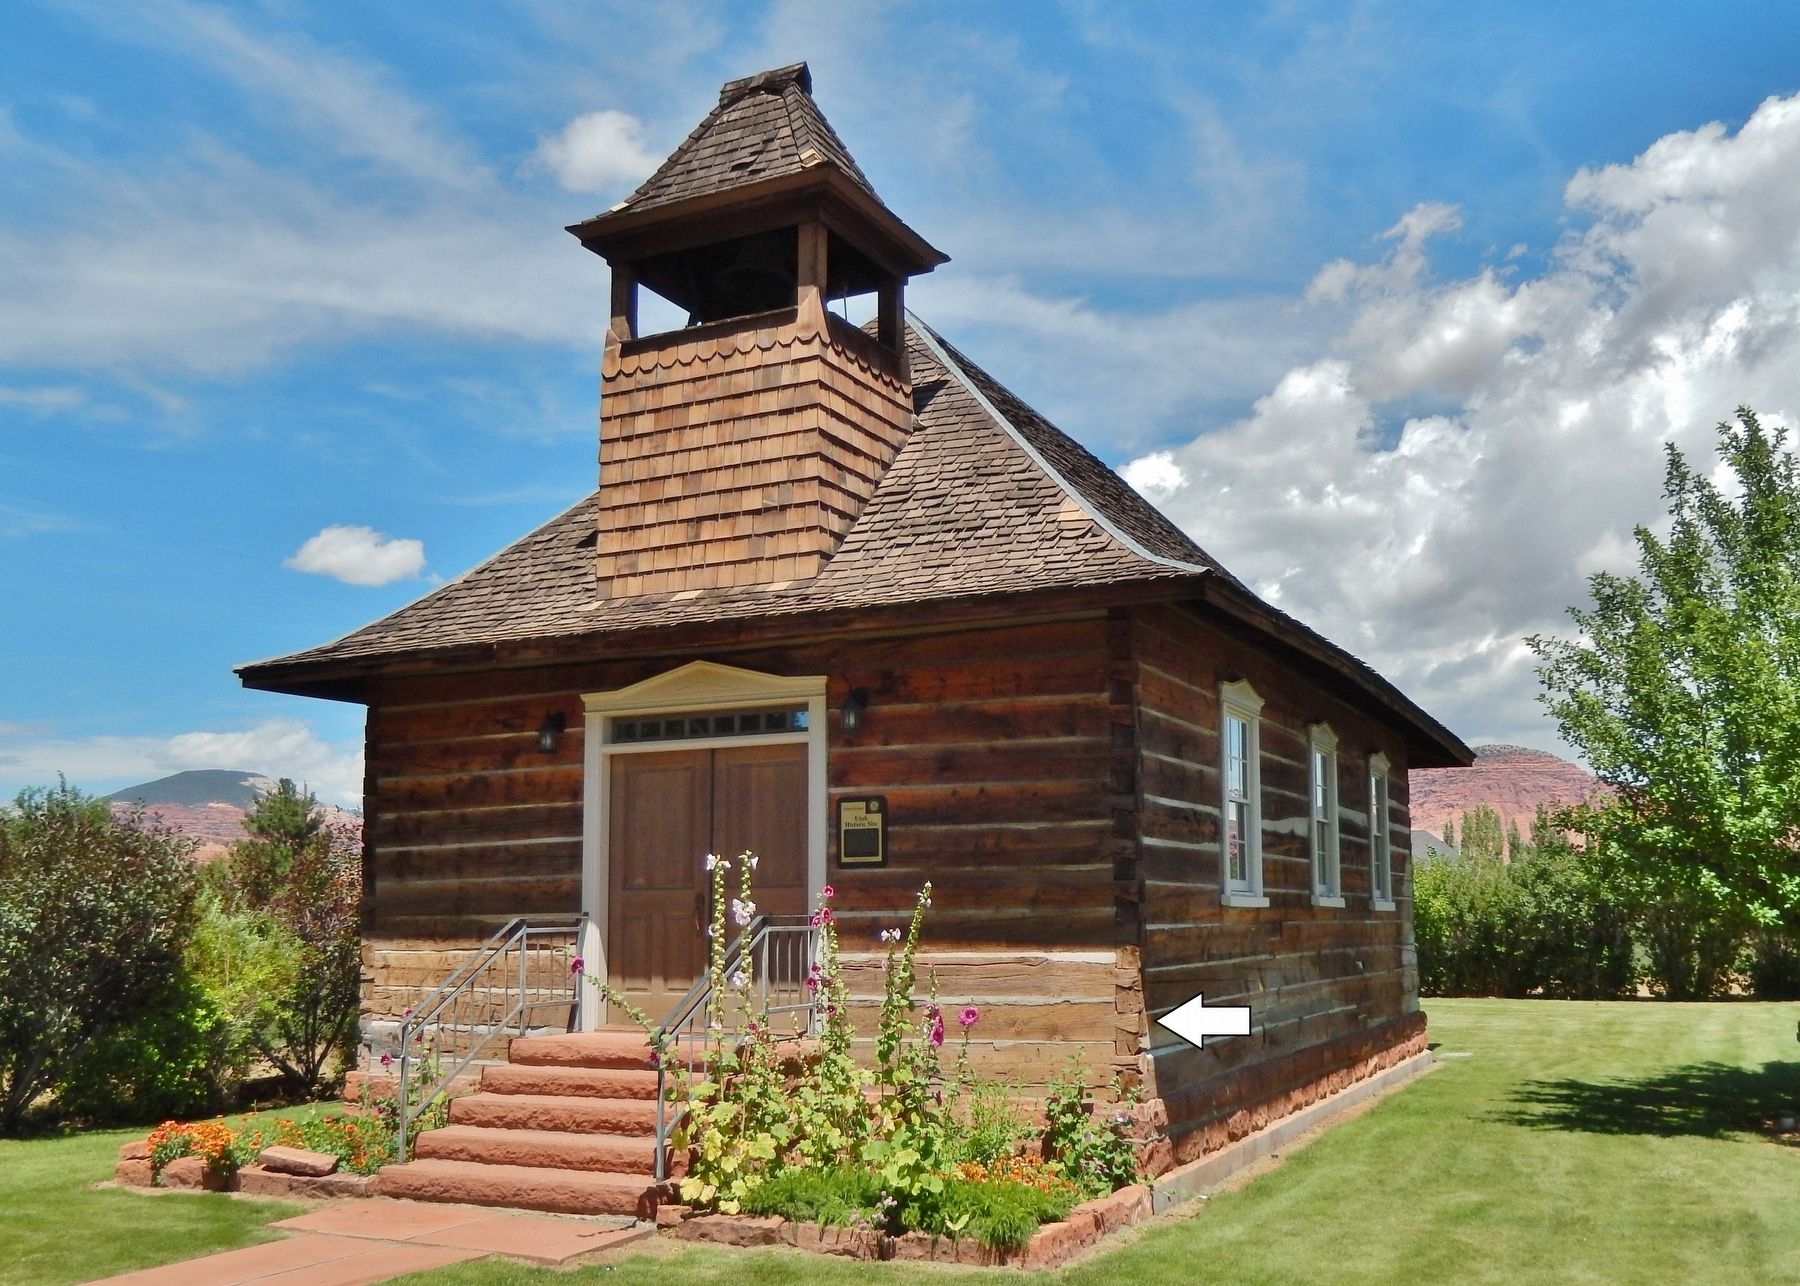 Torrey Log Church and Schoolhouse<br>(<i>precise dovetailed notching visible at corner</i>) image. Click for full size.